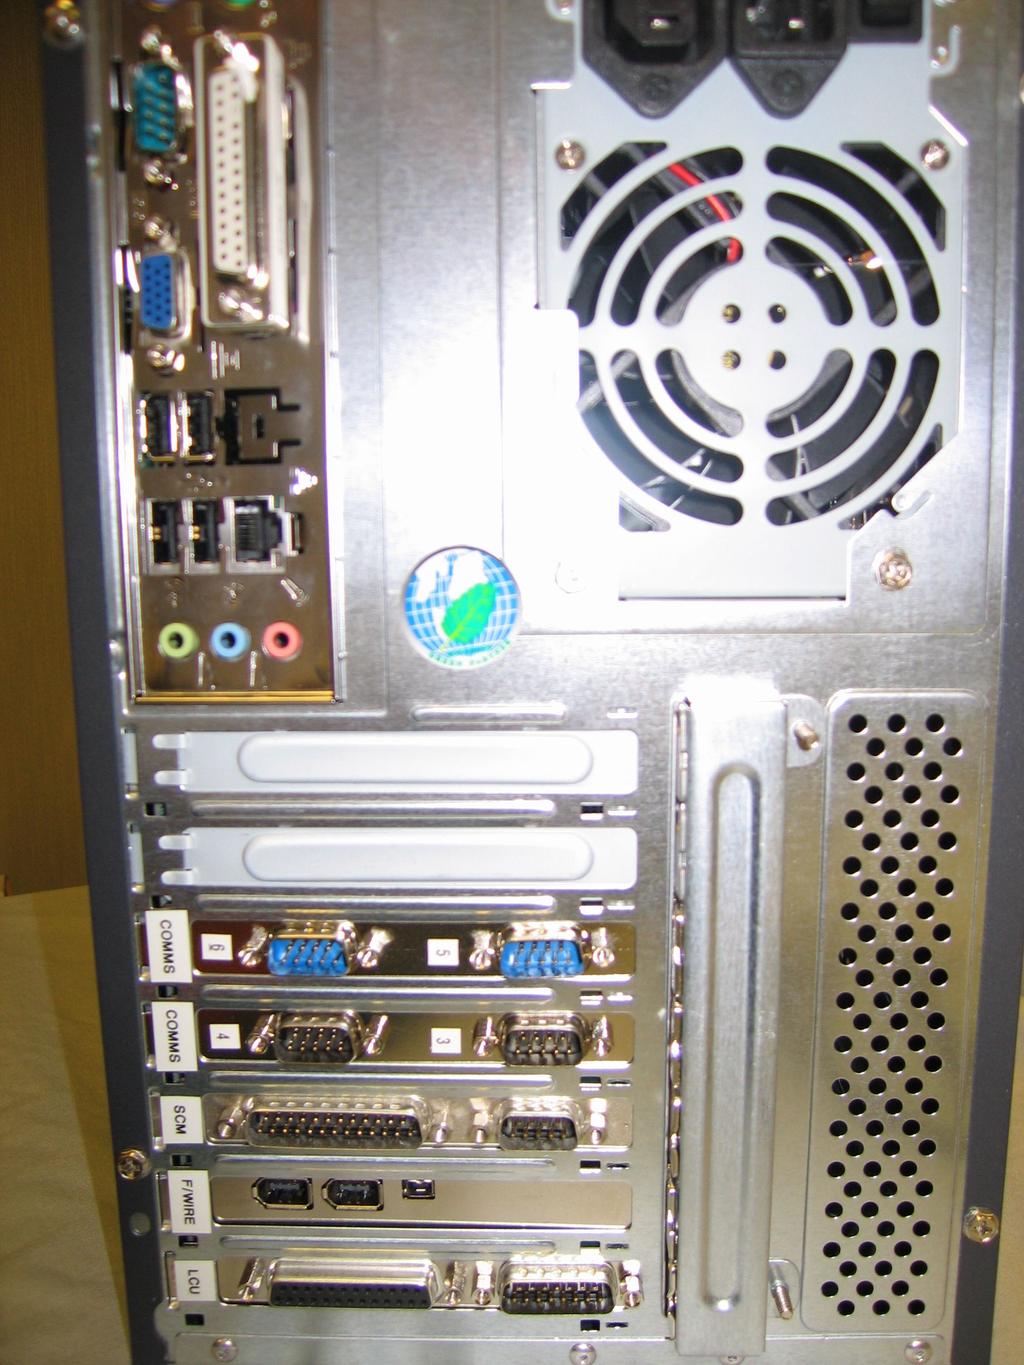 the LIS PC This COM port (1) is used to communicate with the